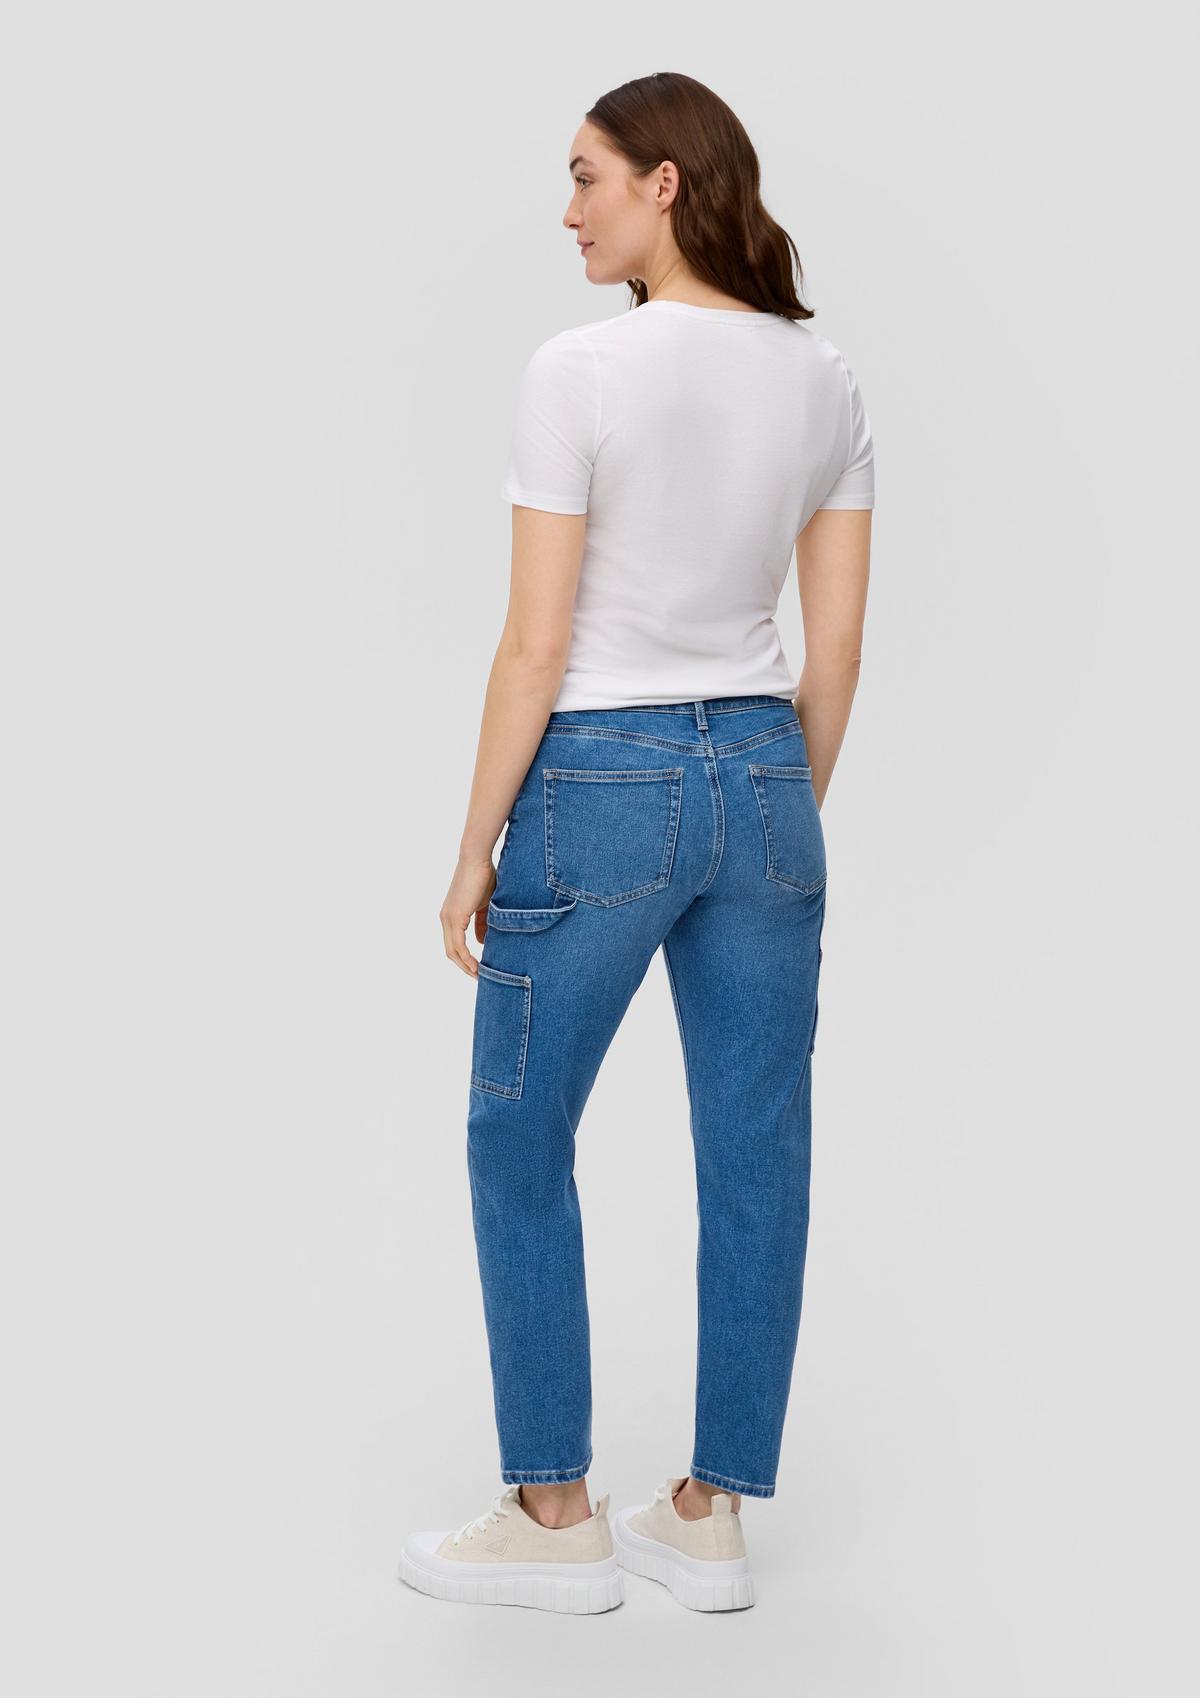 s.Oliver Francis ankle-length jeans / relaxed fit / mid rise / tapered leg / boyfriend